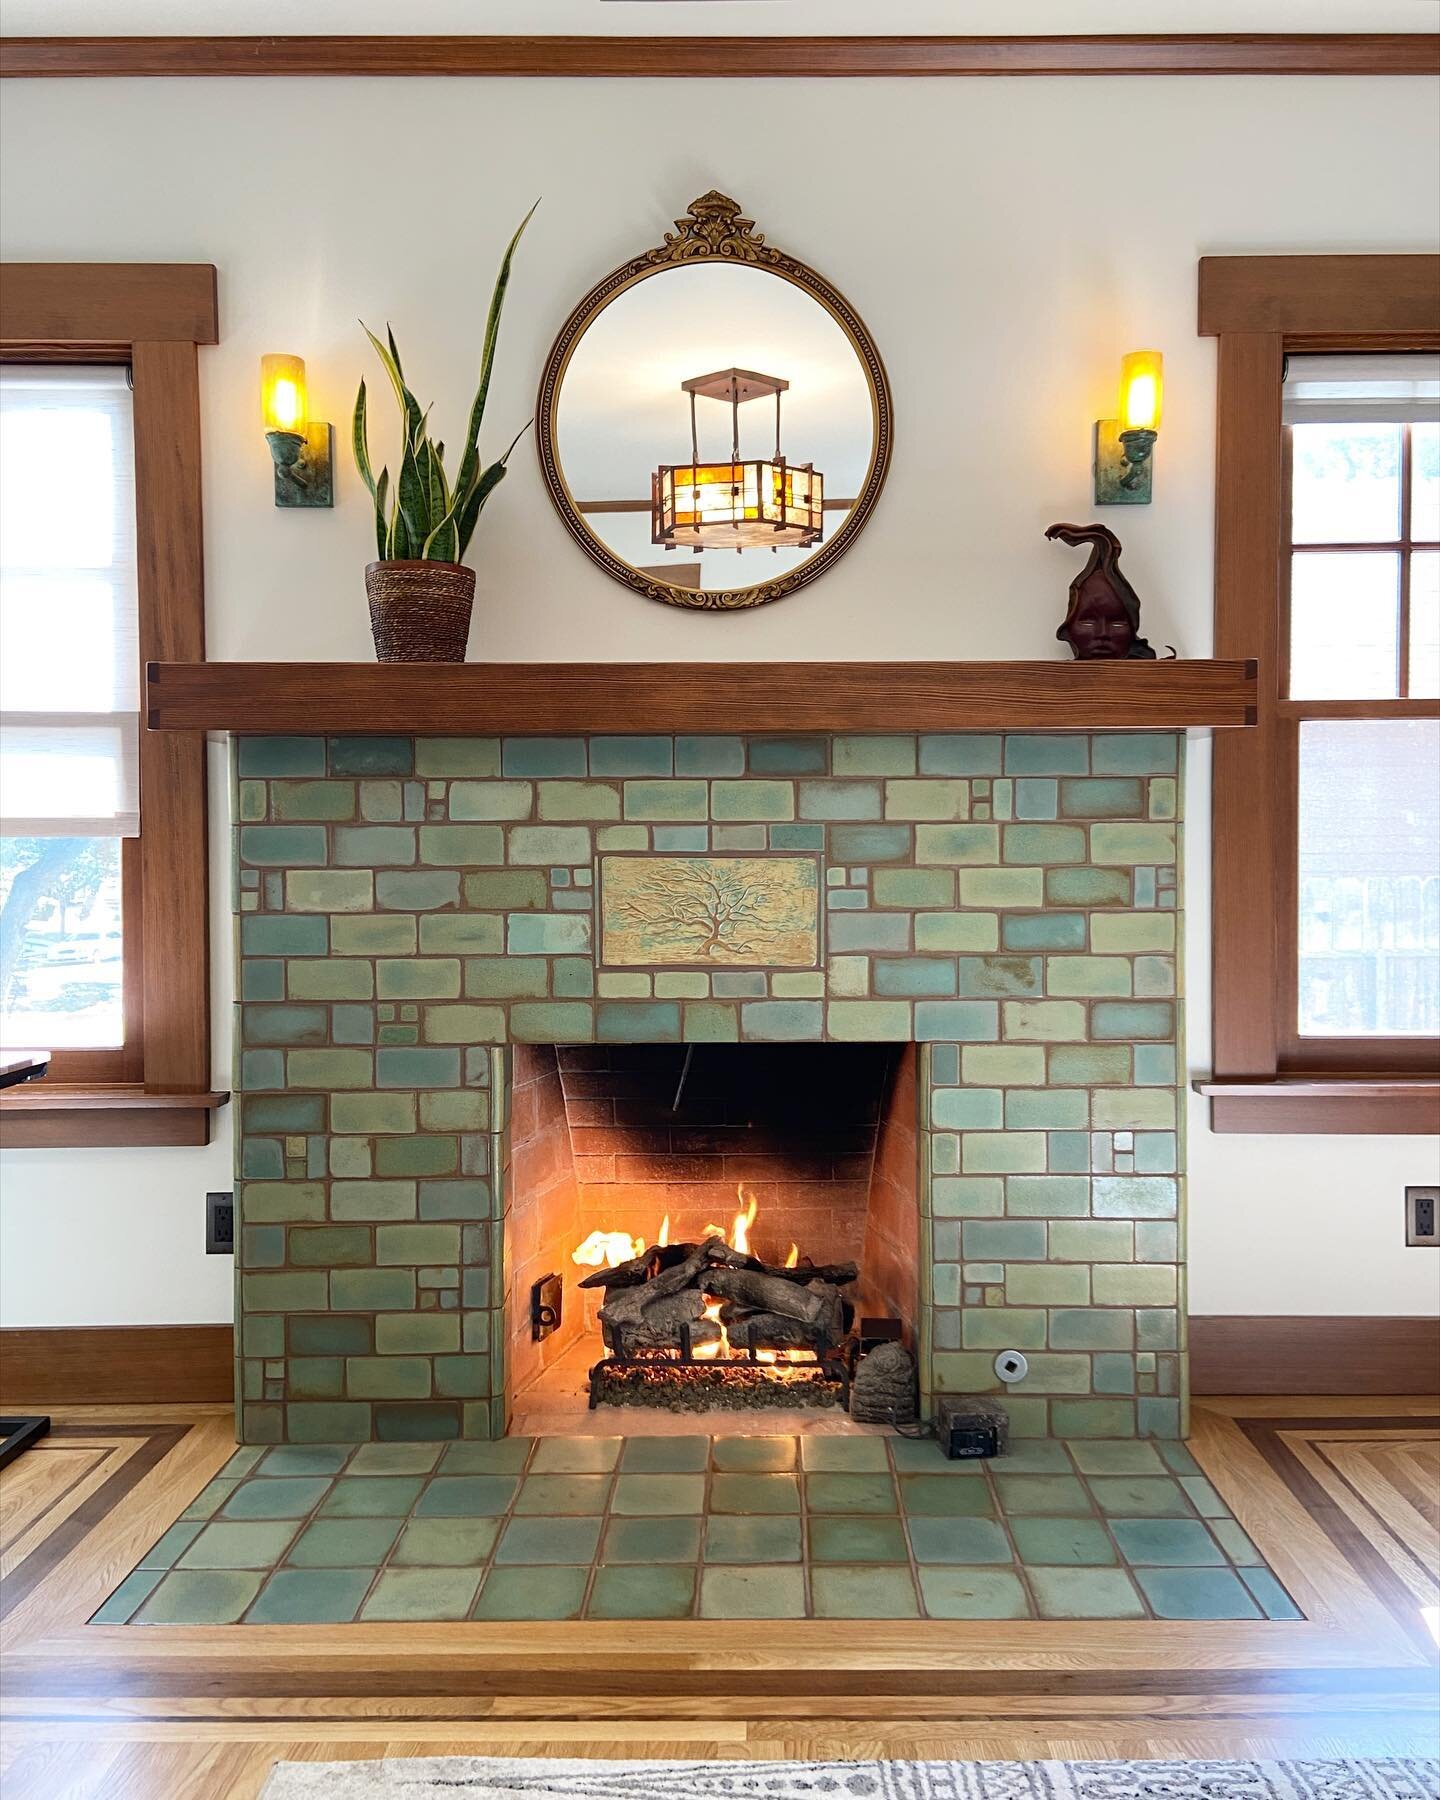 It&rsquo;s finally getting to be fireplace weather here in Los Angeles (60 degrees)! Here&rsquo;s a recent installation in Pasadena&rsquo;s #bungalowheaven 
Installation by #allshapesconstruction 
#craftsmanhome #craftsmanrenovation #craftsmanfirepla